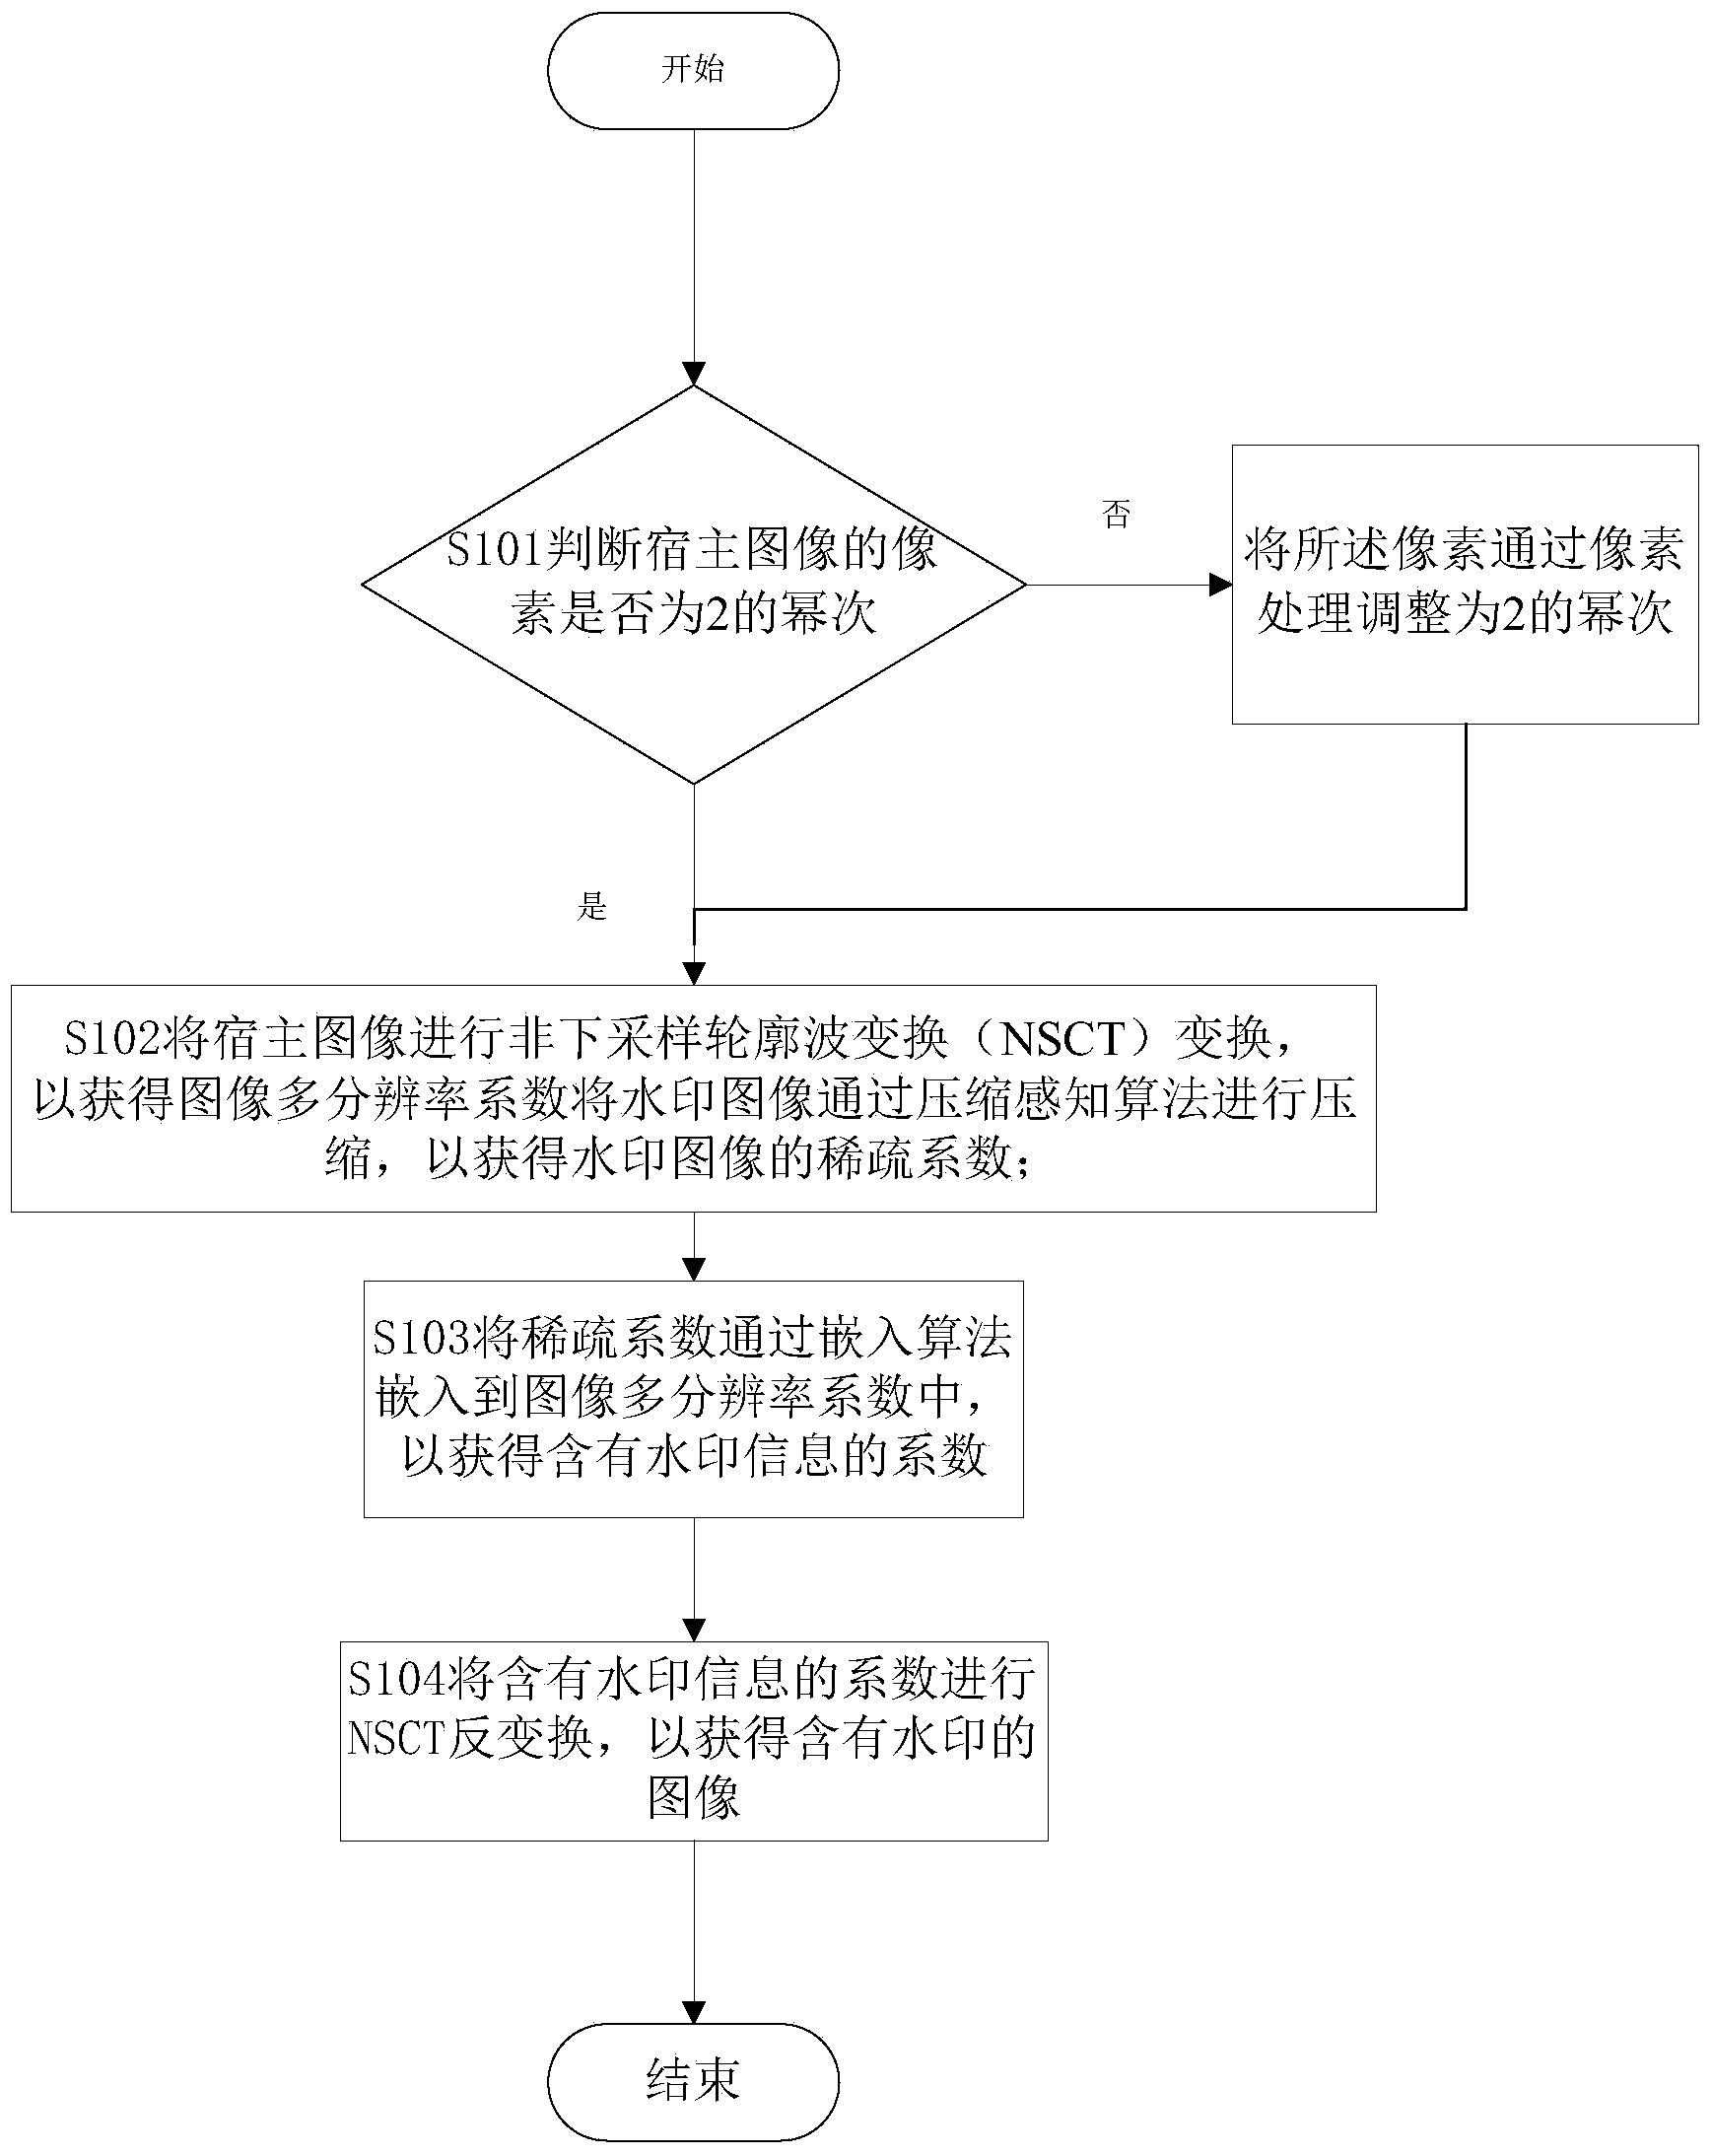 Watermark embedding method for host image and watermark extracting method for image including watermark